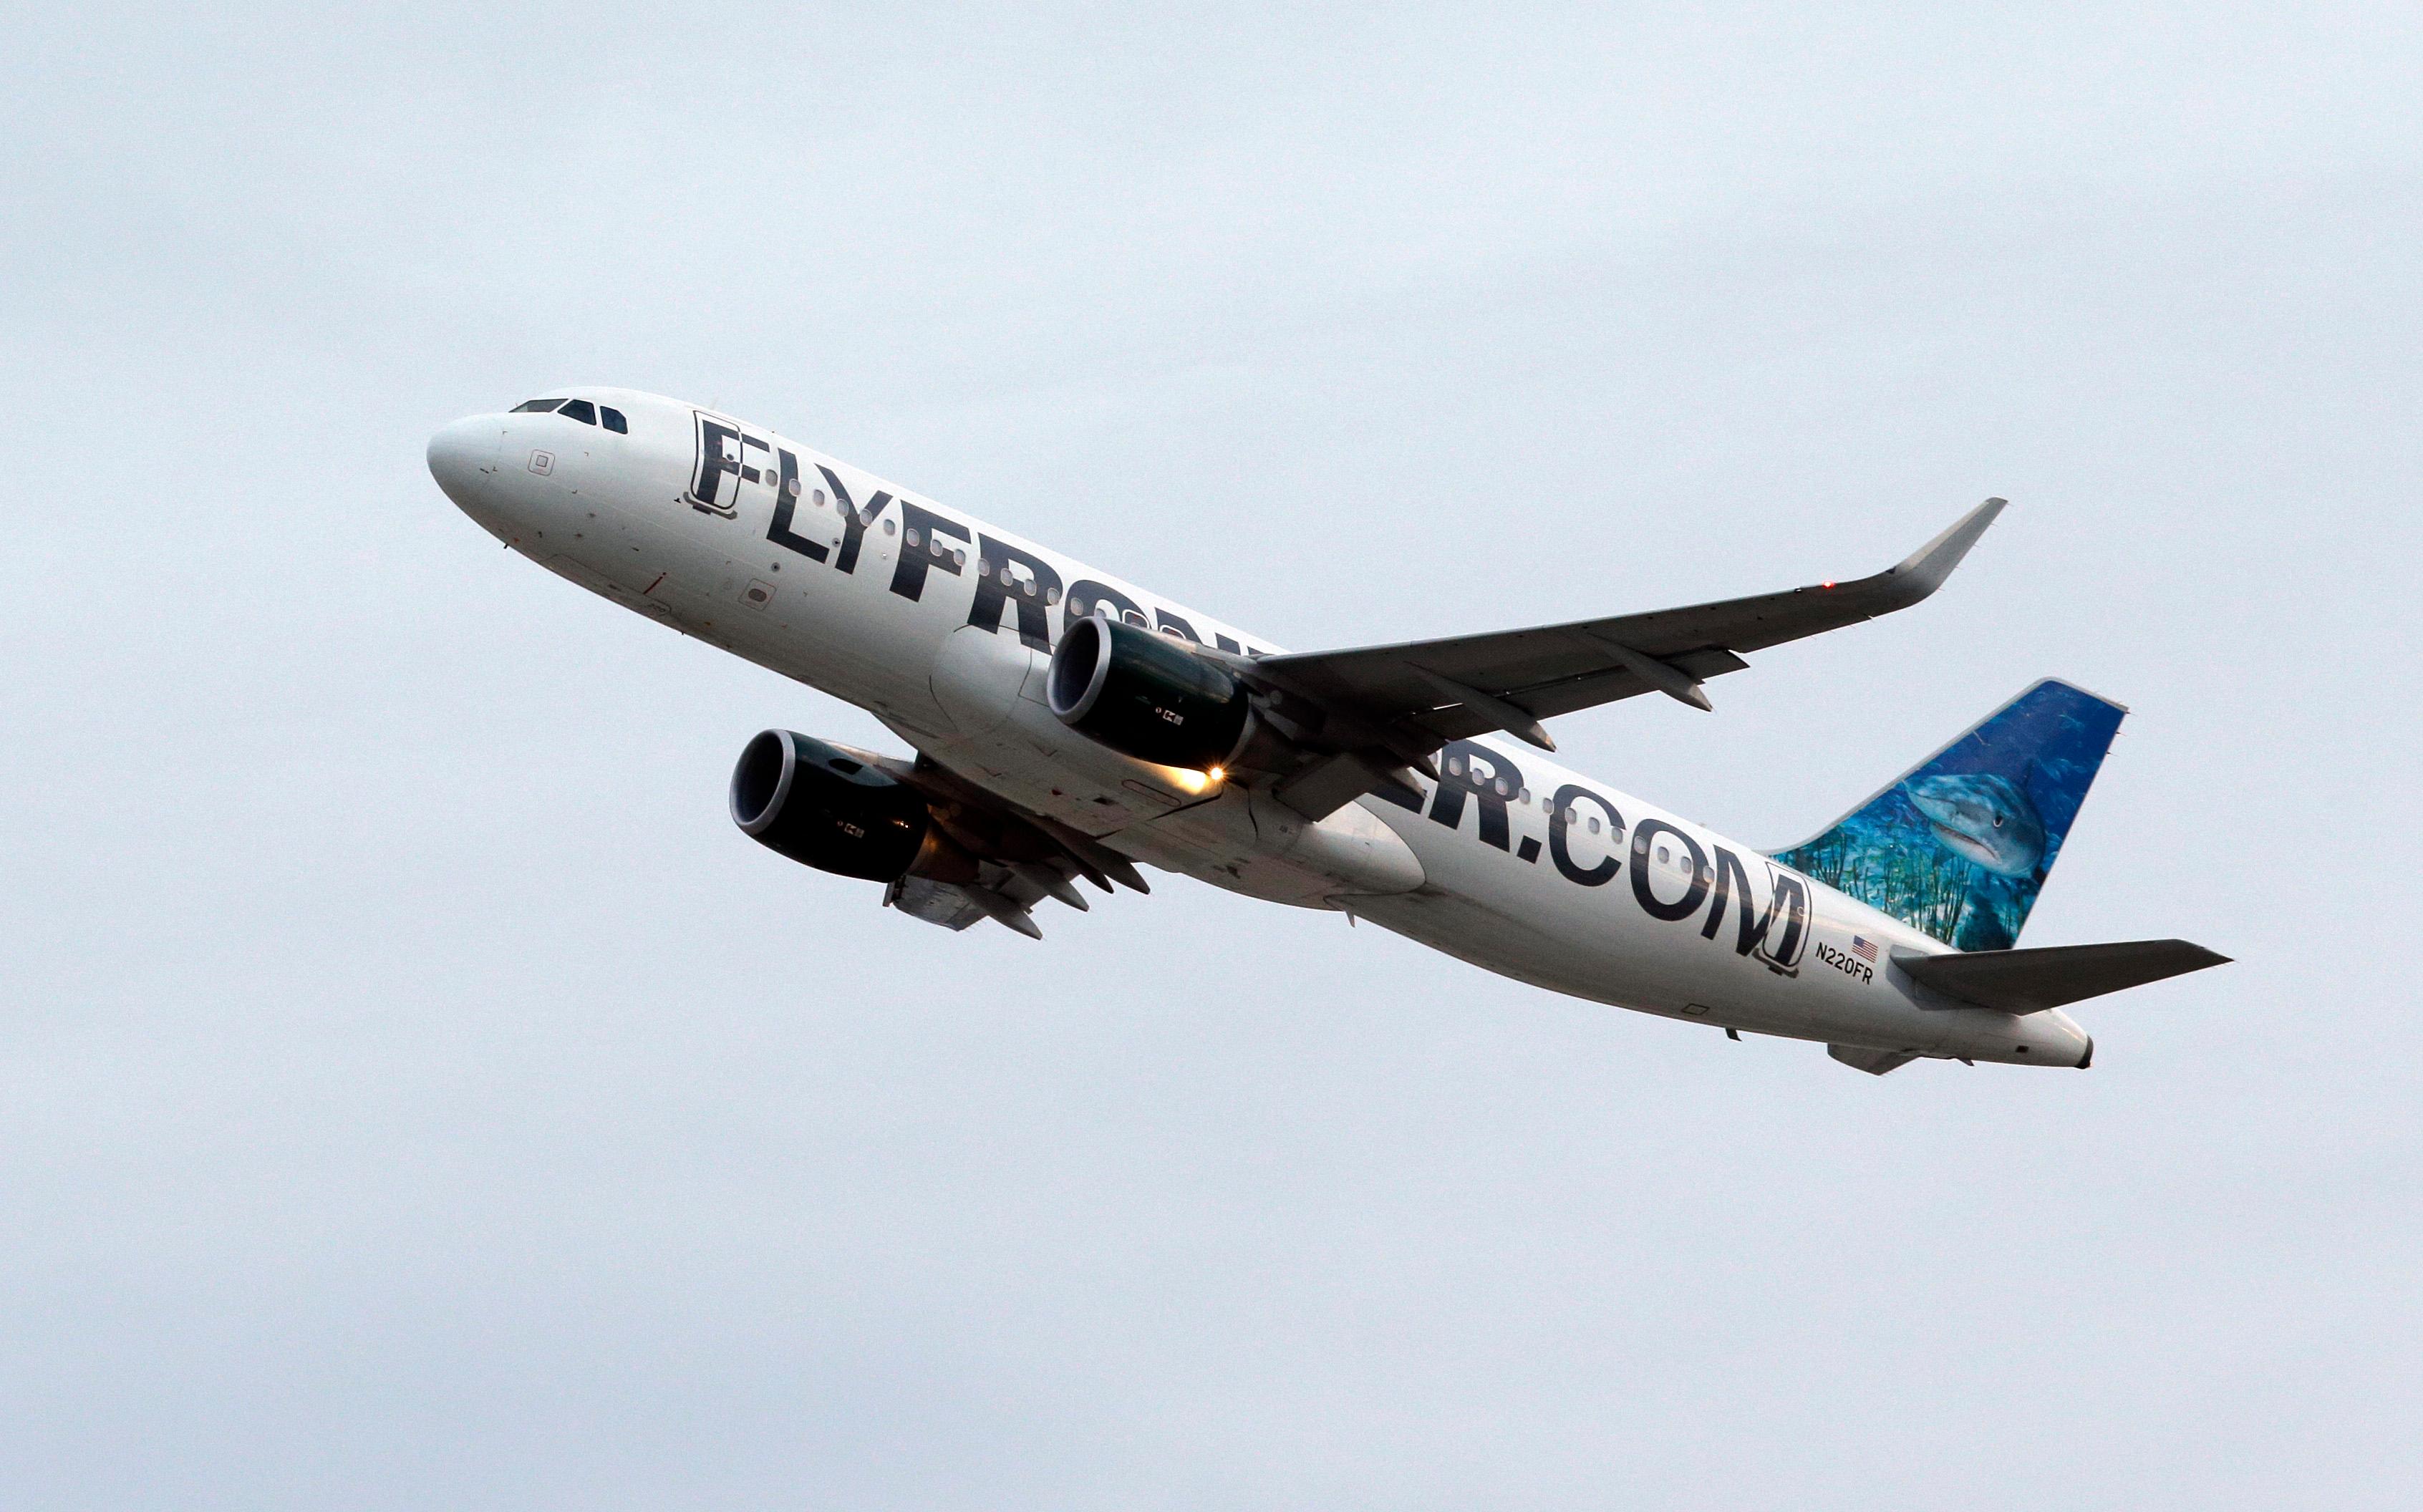 Photo: Frontier Airlines airplane (AP Photo)